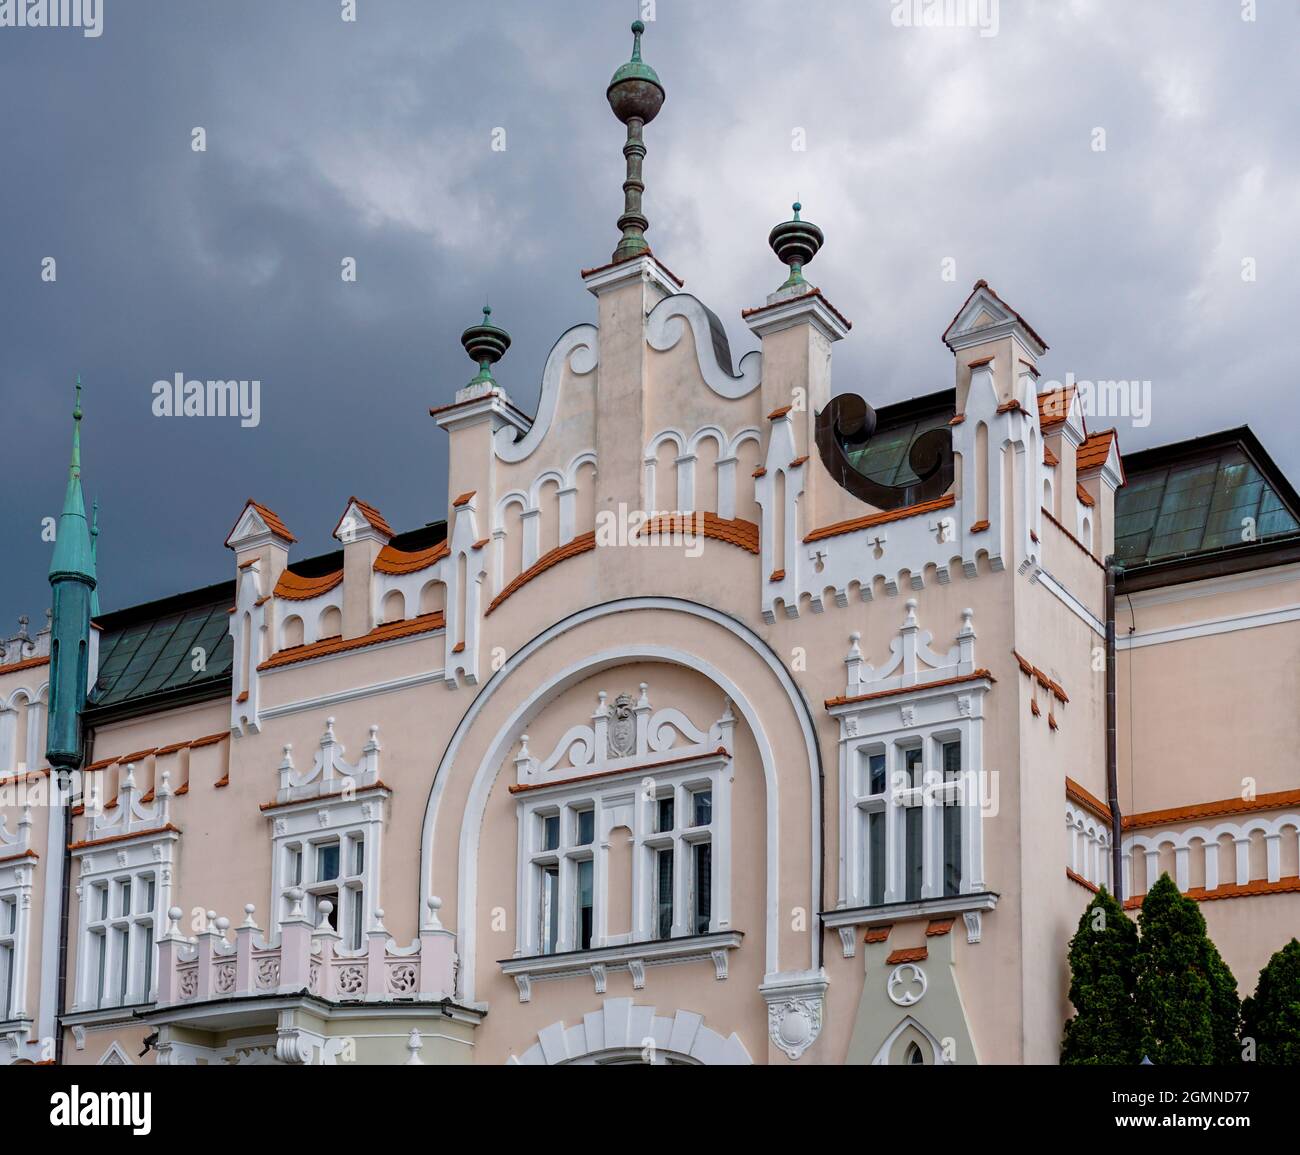 Rzeszow, Poland - 14 September, 2021: close up view of the architectural Renassaince style of the Polish Bank building in the old town of Rzeszow Stock Photo